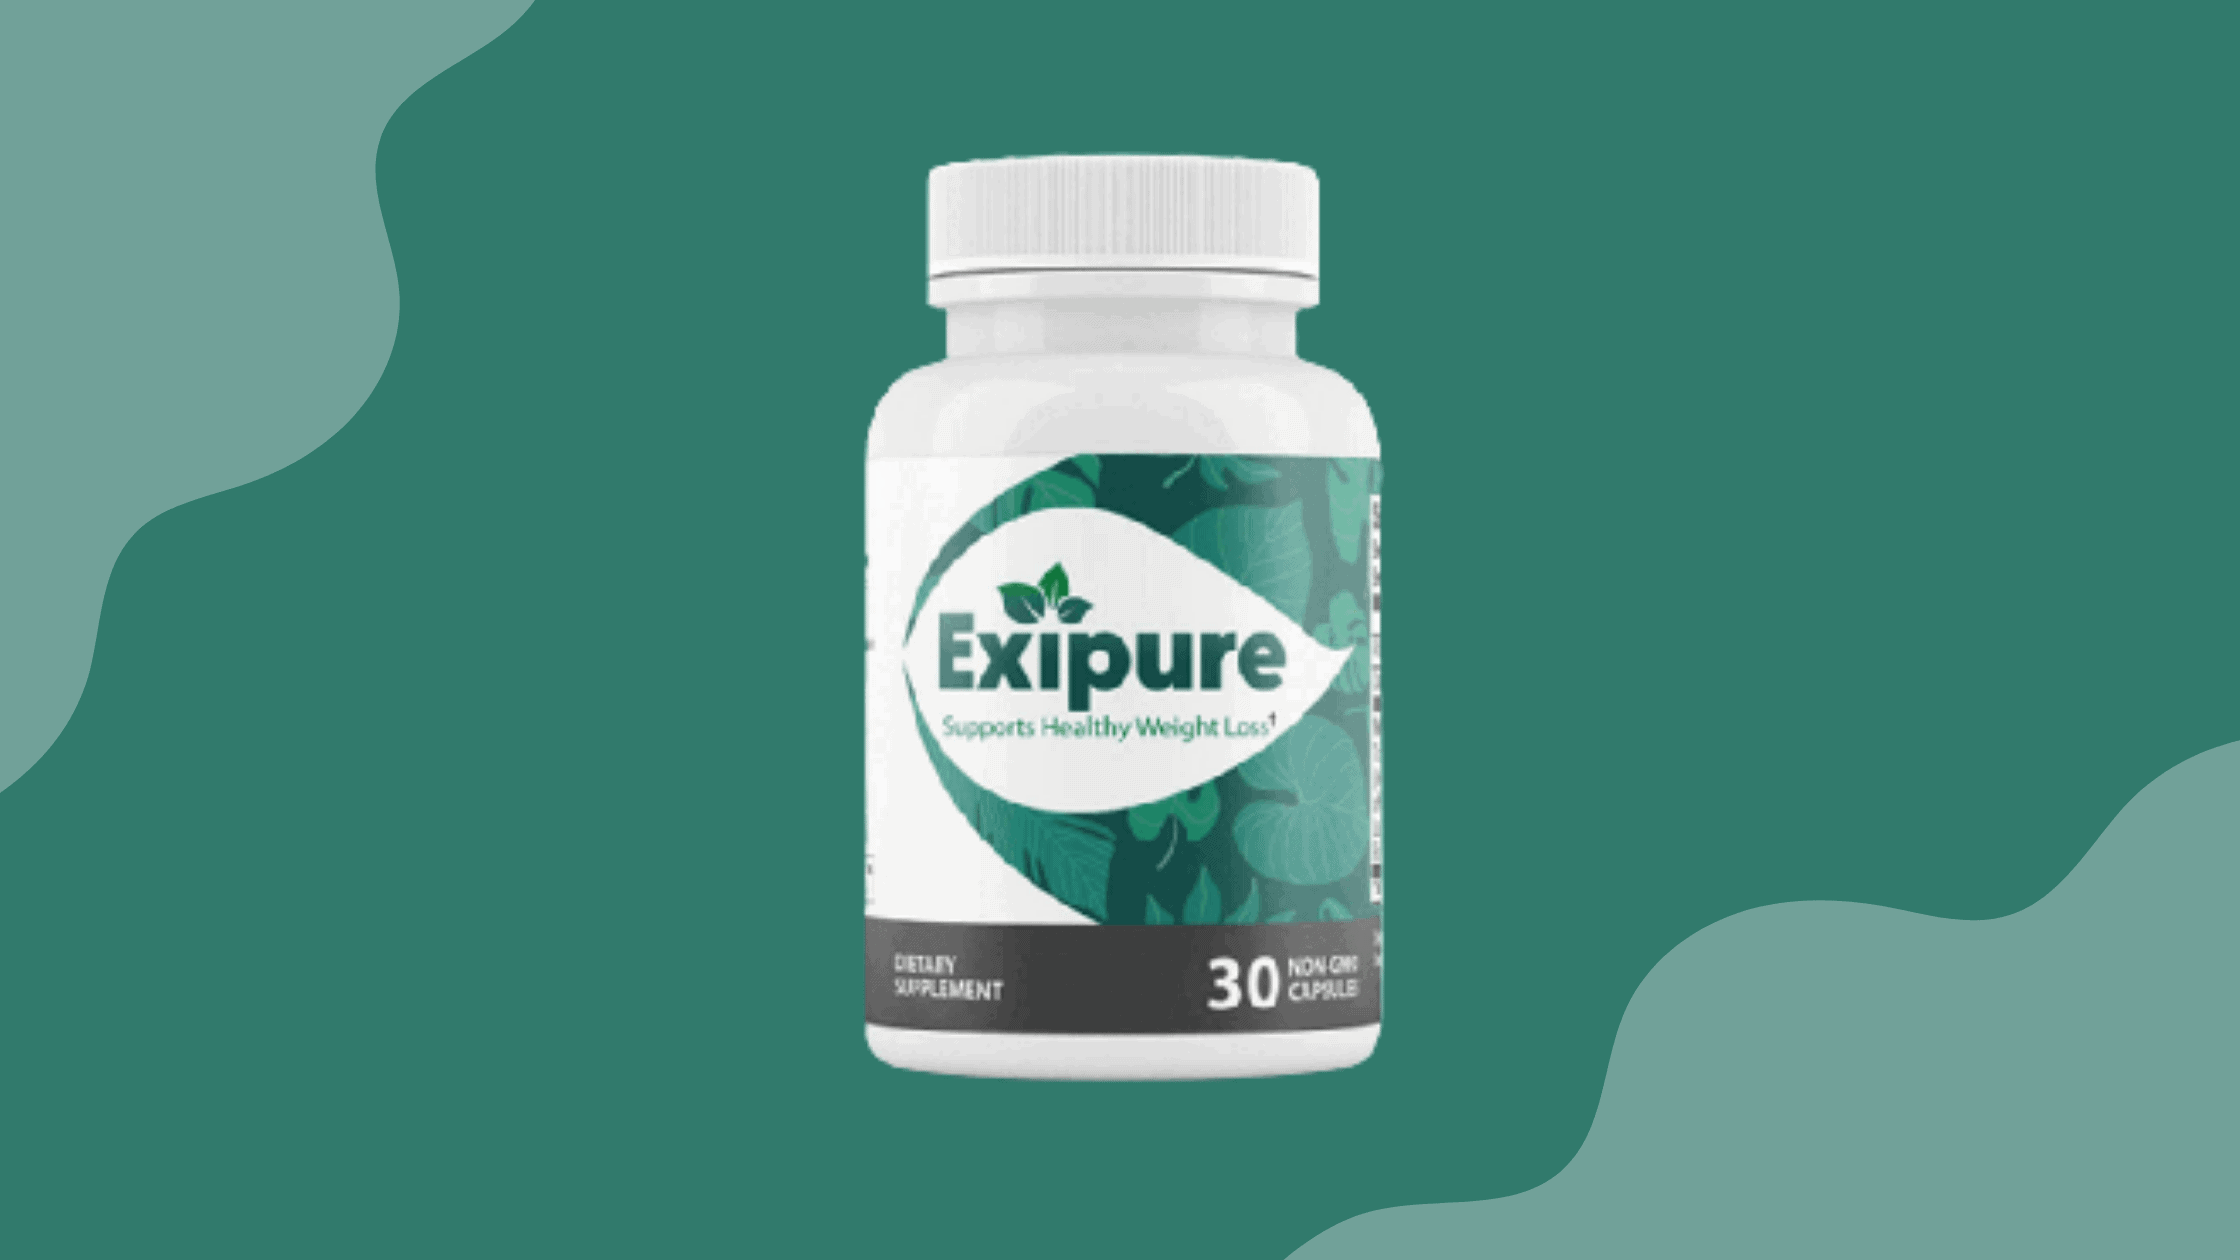 Exipure Reviews: Clinically Proven Formula For Healthy Weight Loss!